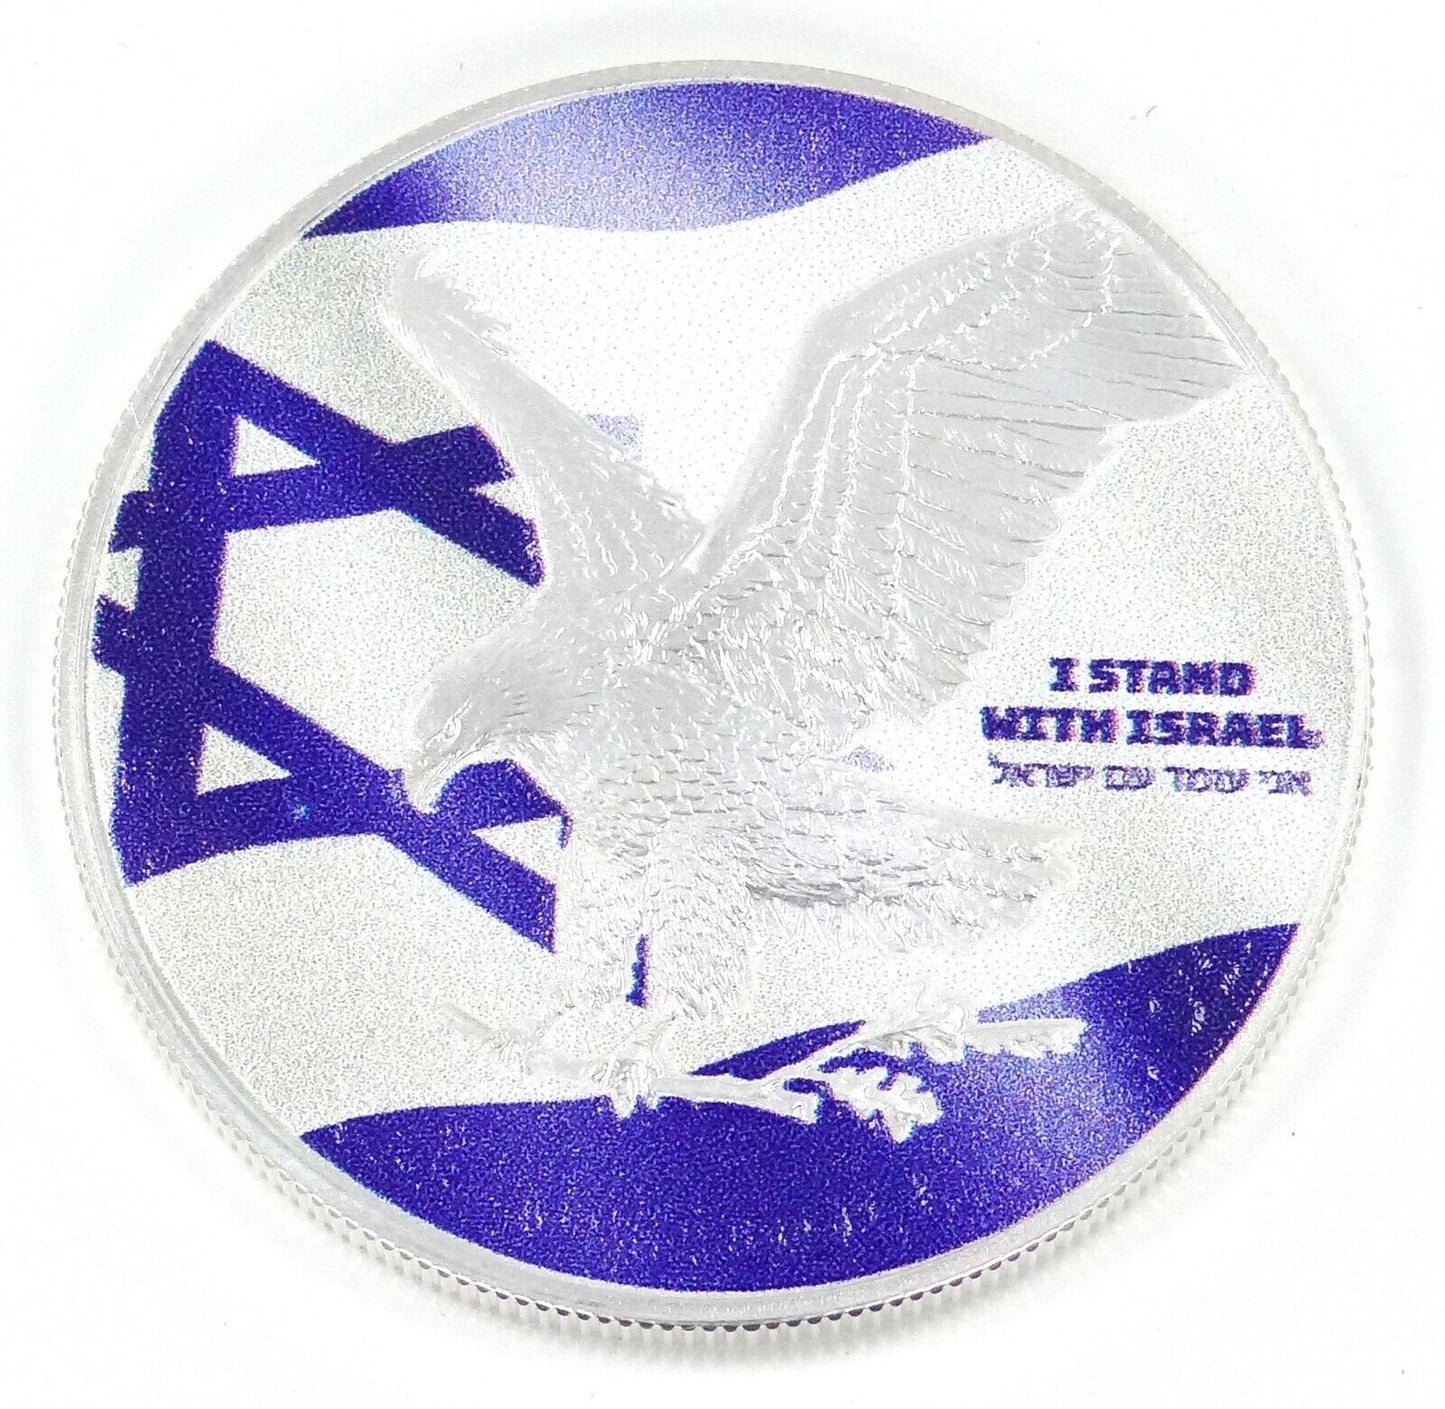 1 Oz Silver Coin 2023 American Eagle $1 Jewish I Stand With Israel in Capsule